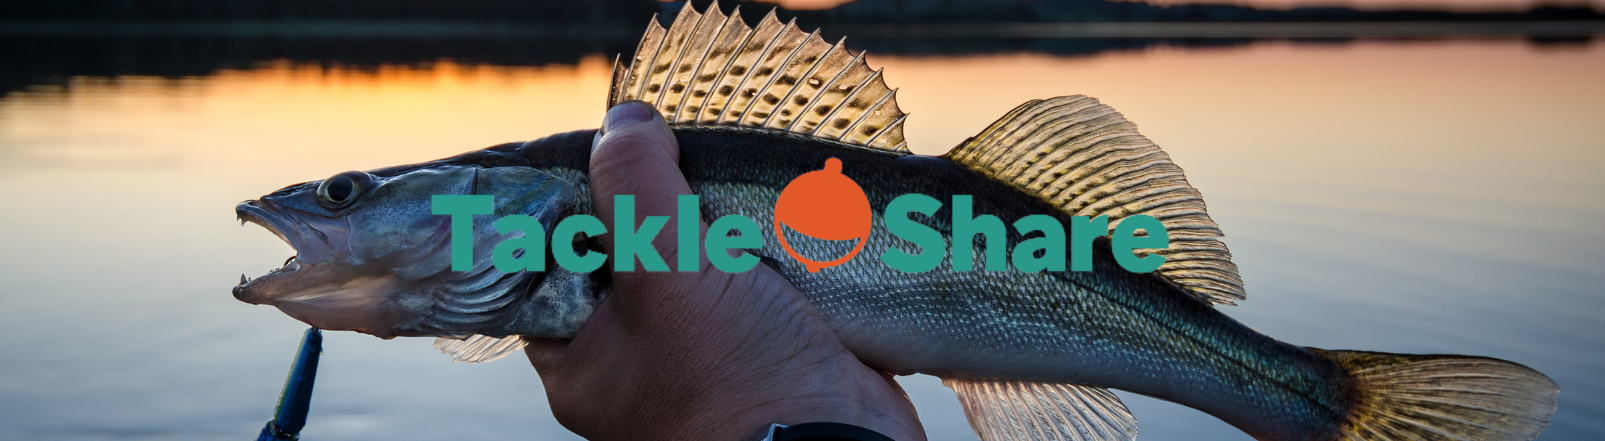 Tackleshare logo with a walleye in the background